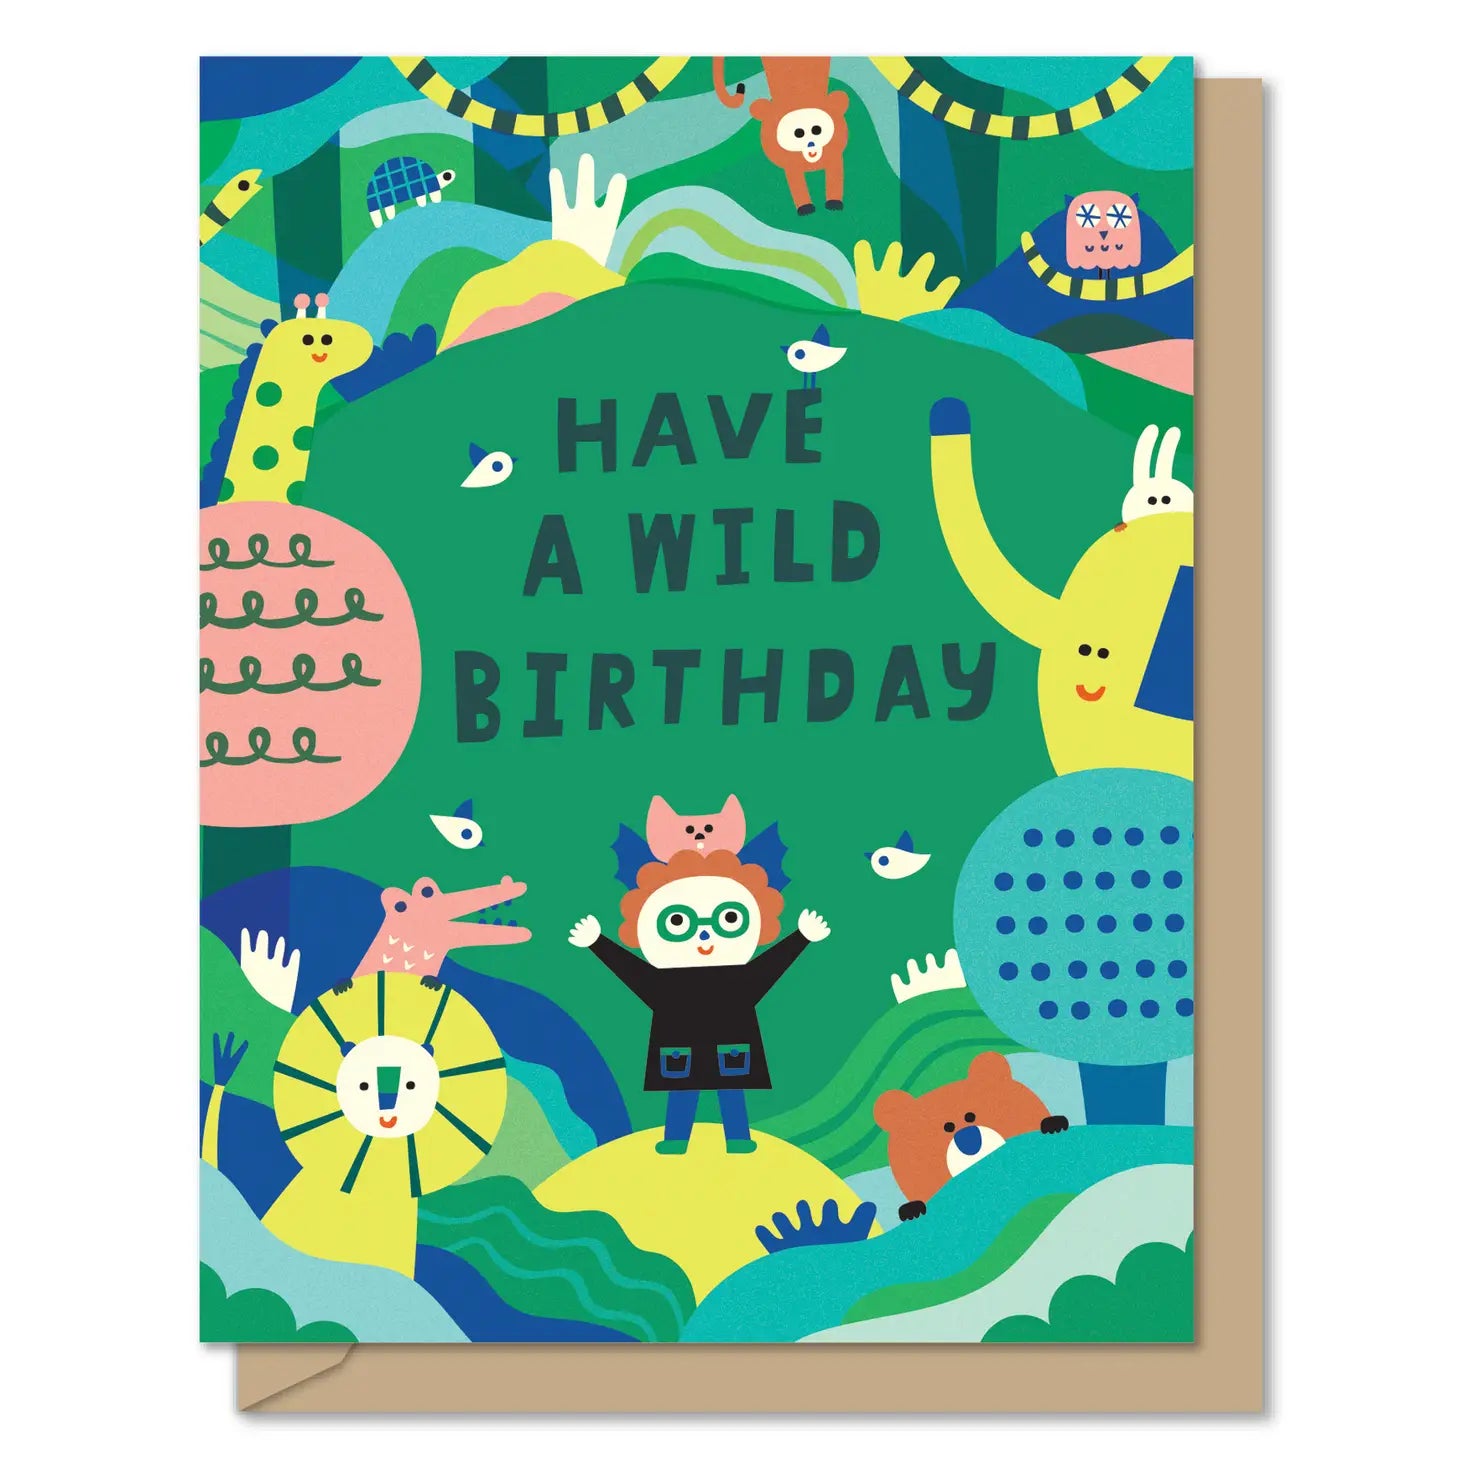 Have a wild Birthday Greeting card